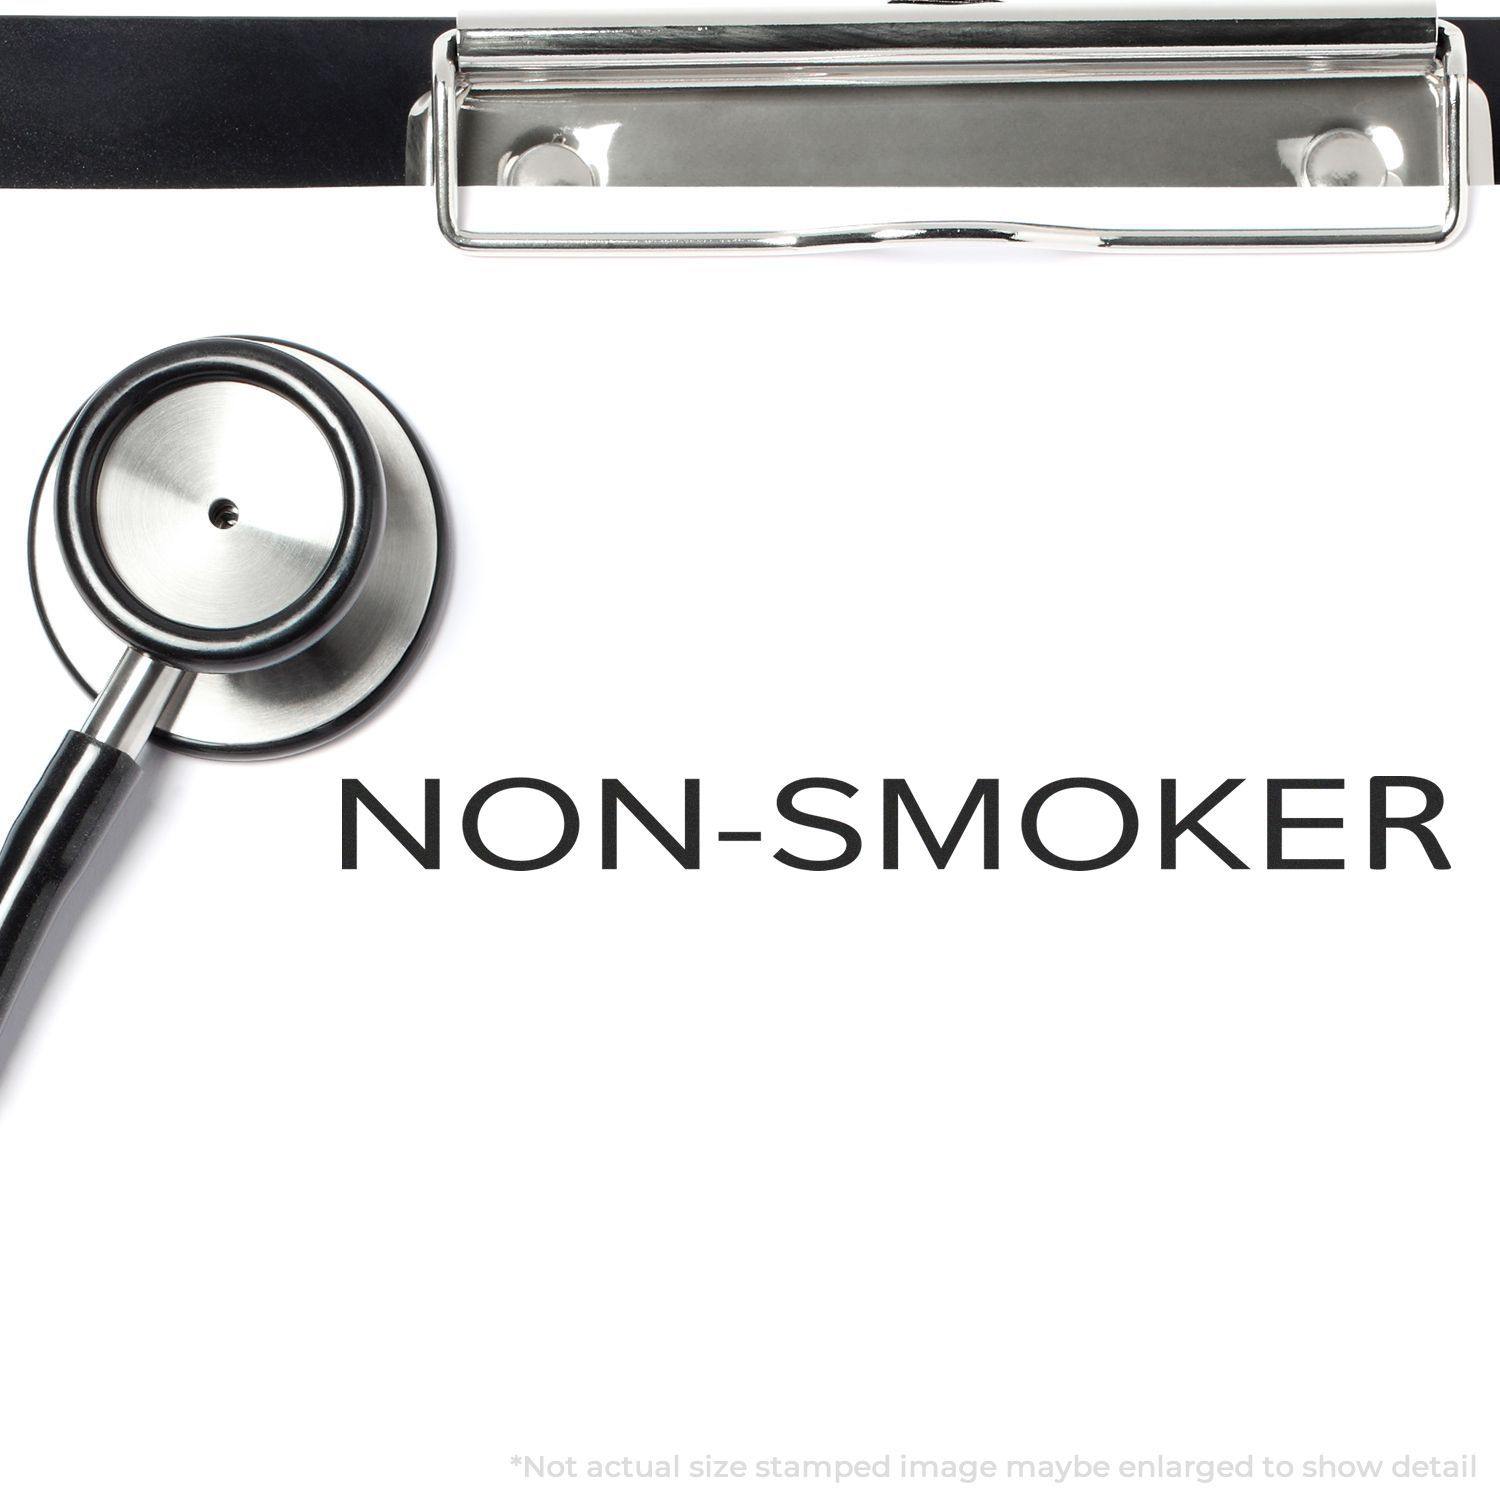 In Use Large Narrow Font Non-Smoker Rubber Stamp Image